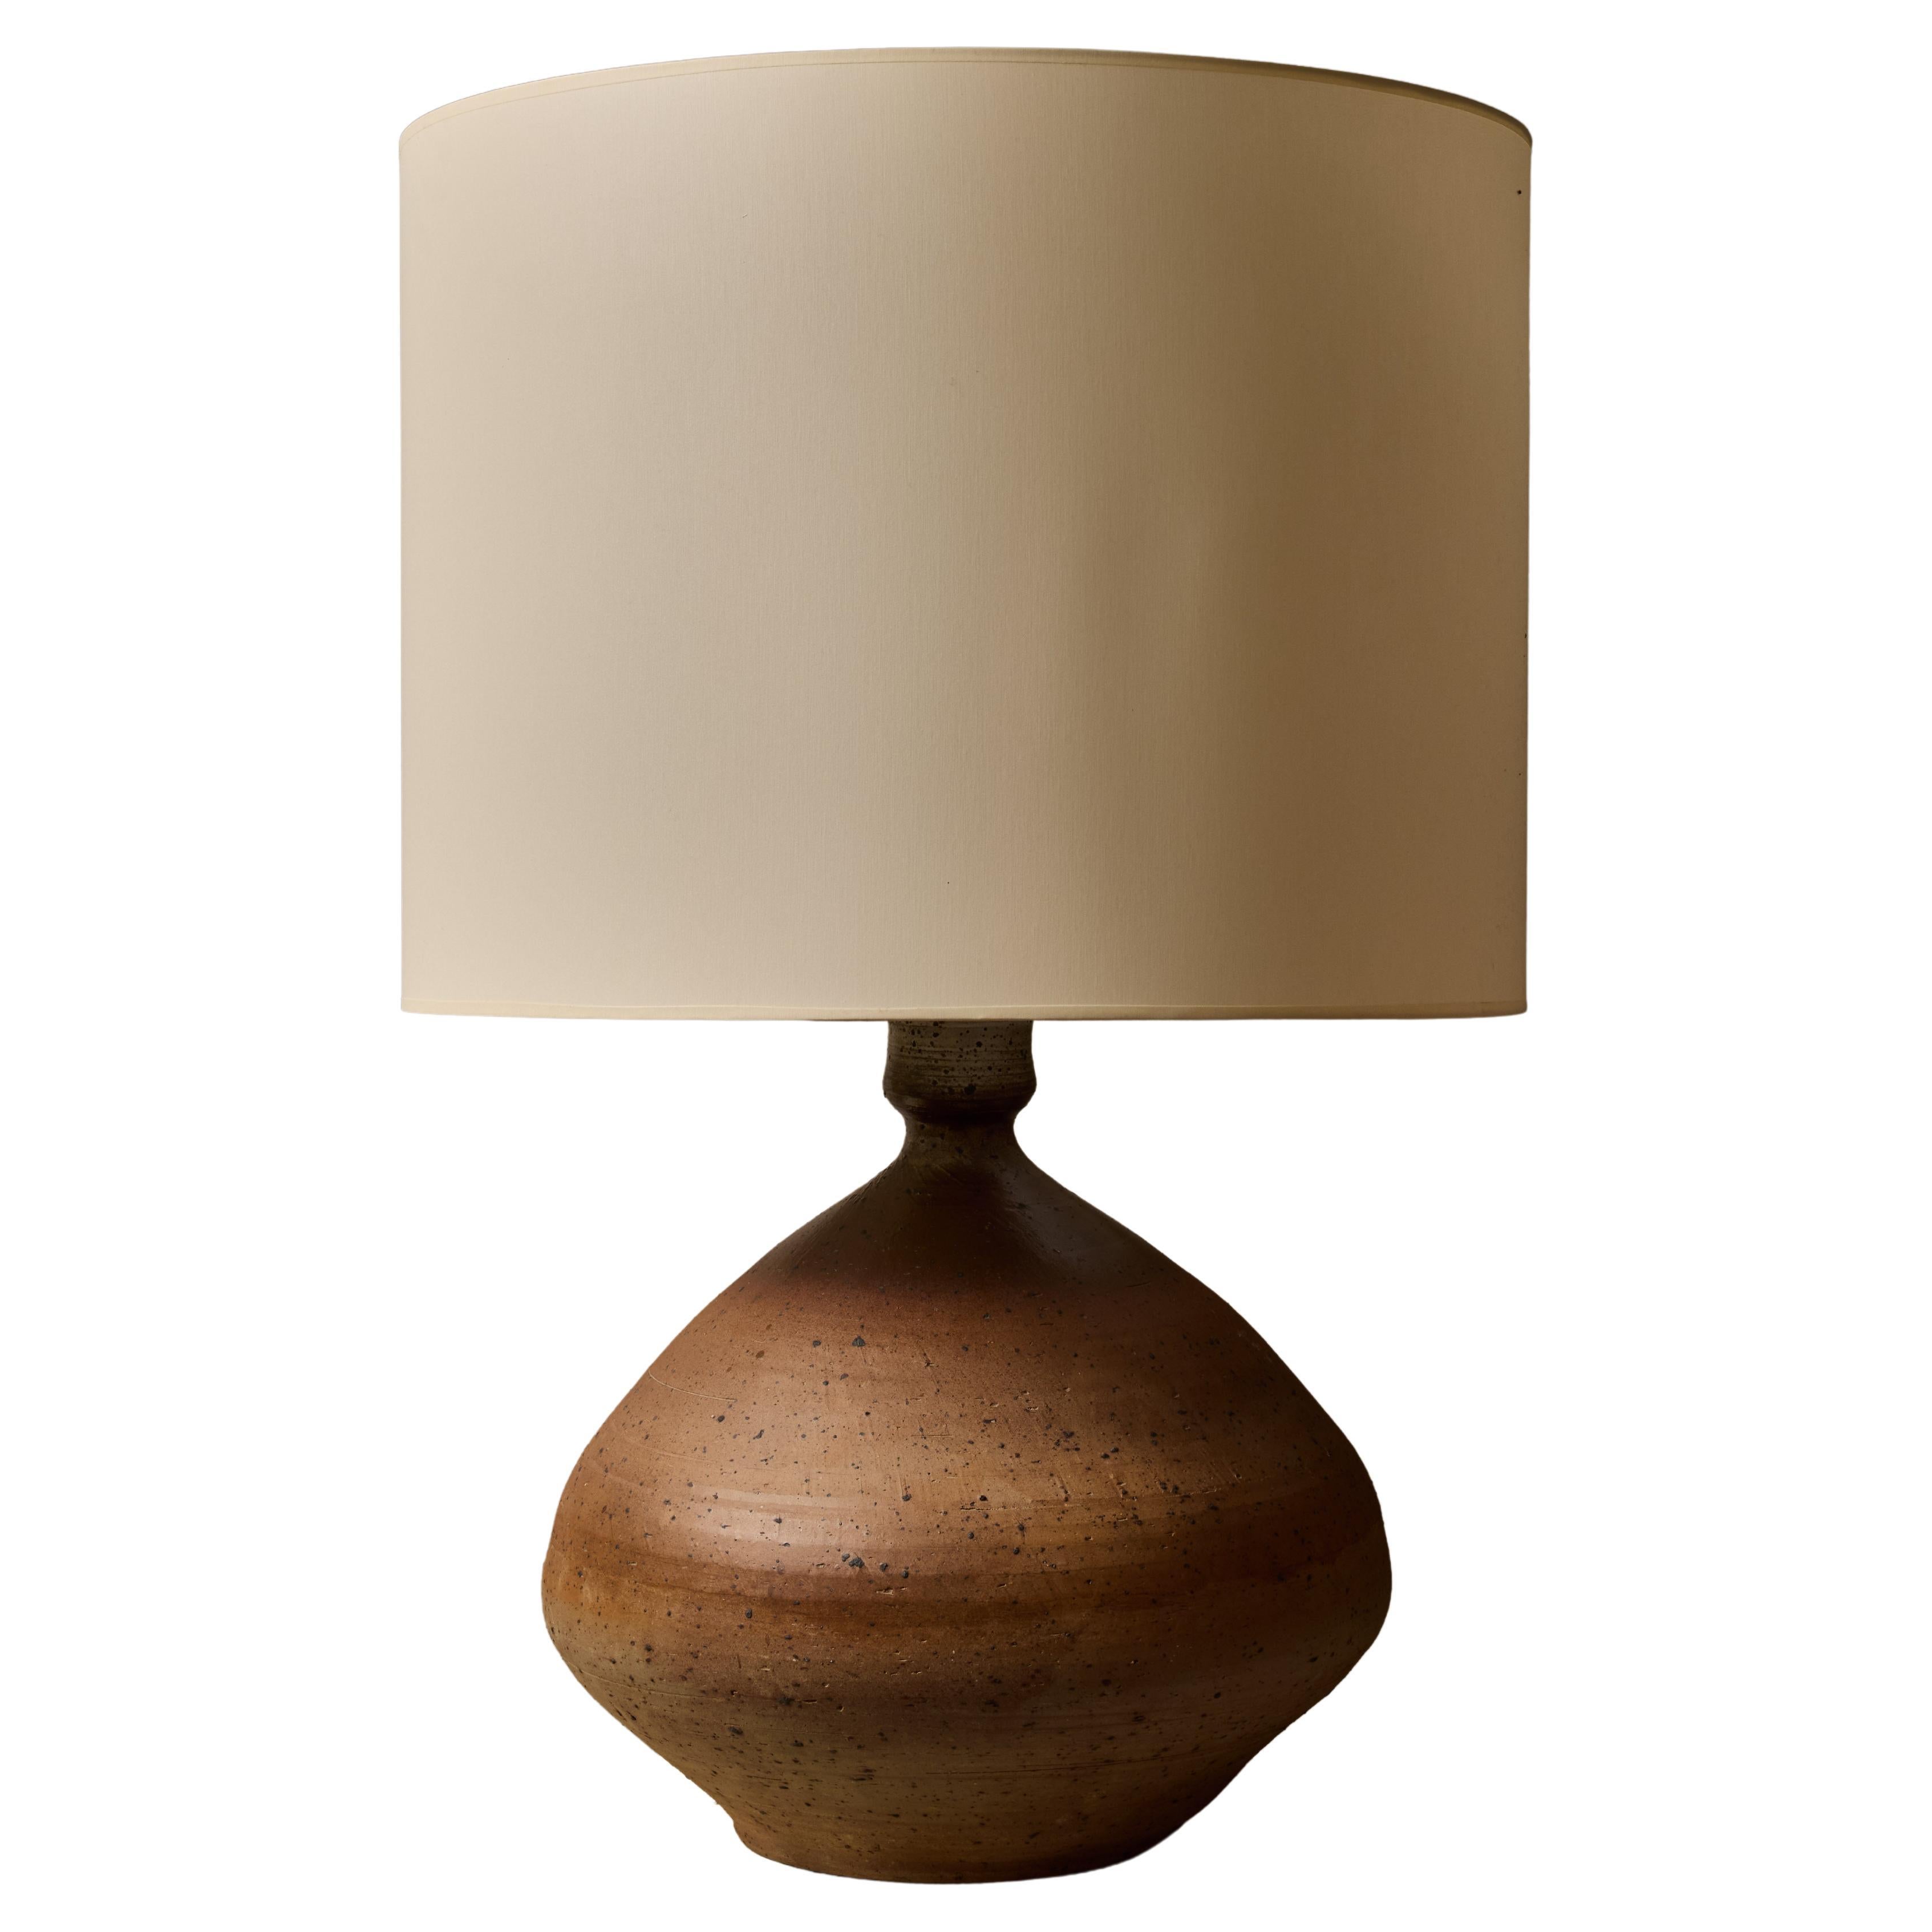 Massive Table Lamp in Different Shades of Terracotta Colour by François Lanusé For Sale